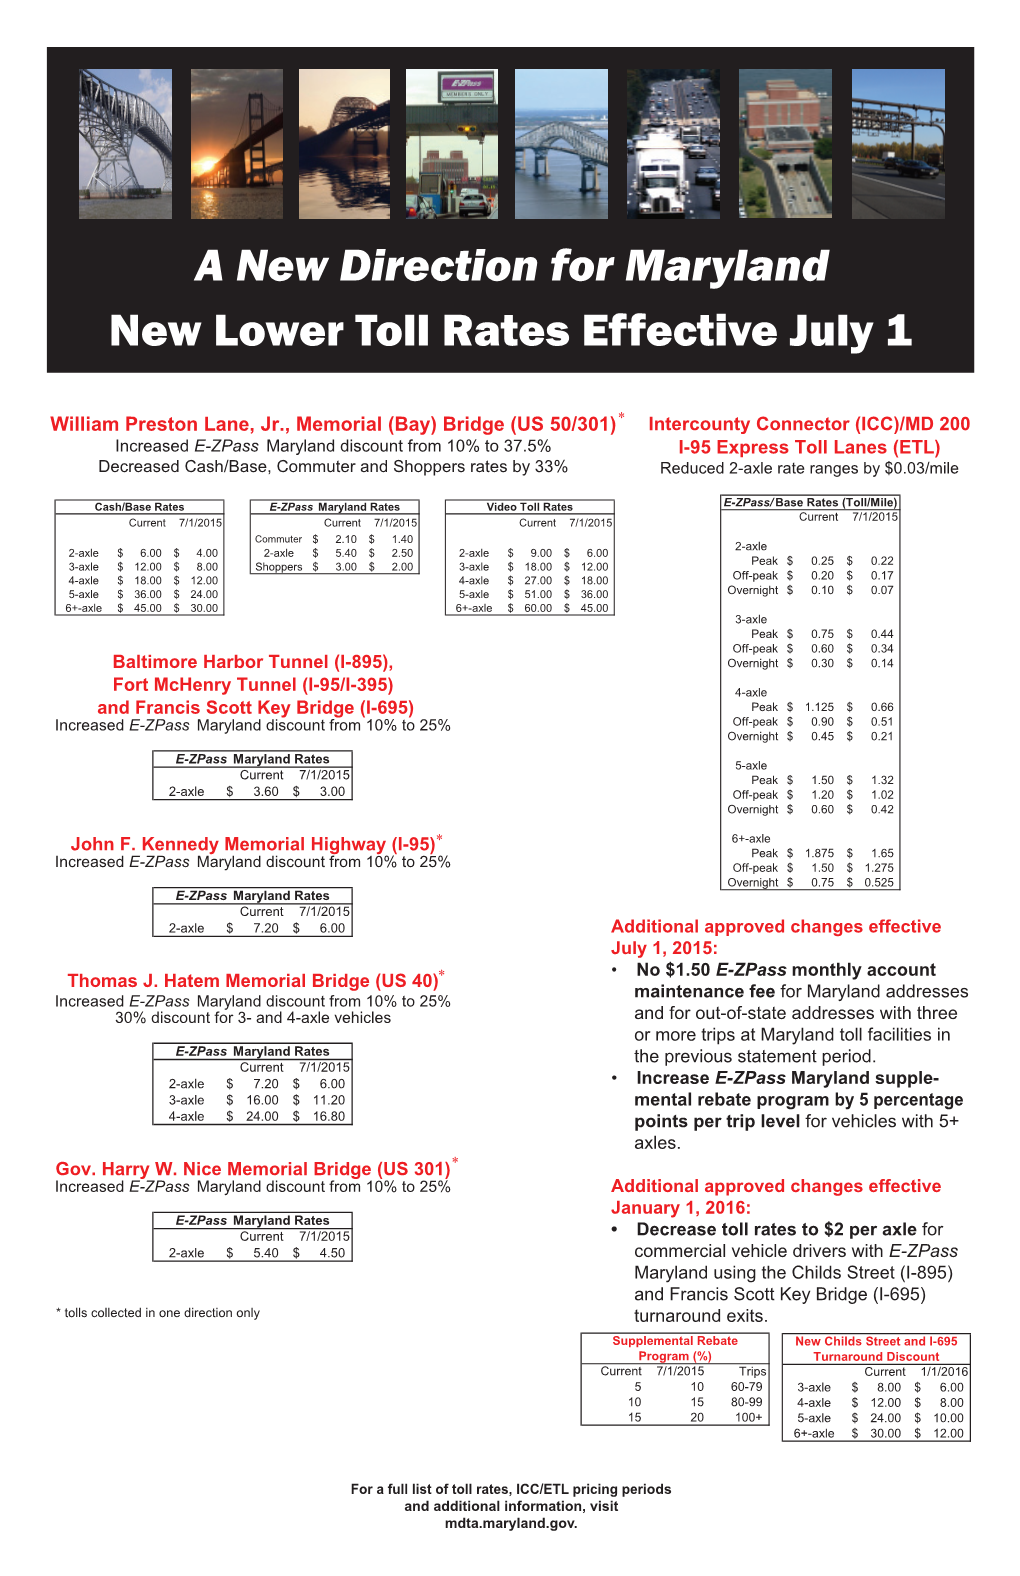 A New Direction for Maryland New Lower Toll Rates Effective July 1